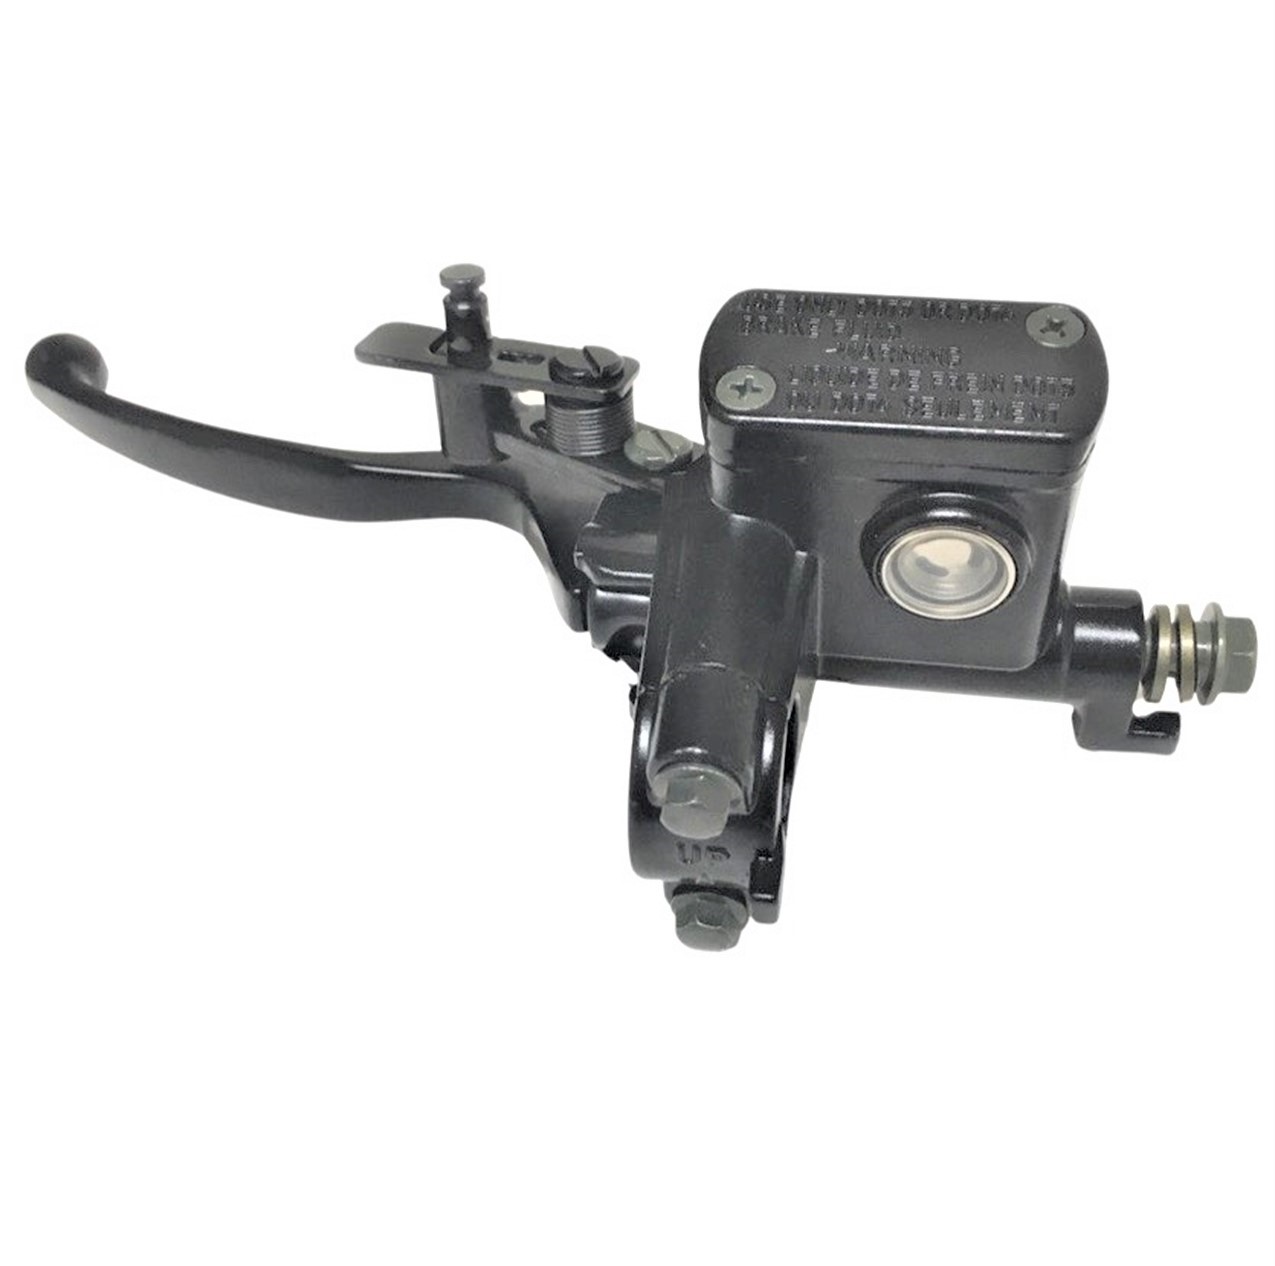 BRAKE LEVER & MASTER CYLINDER (Left Hand) Fits many ATVs & scooters